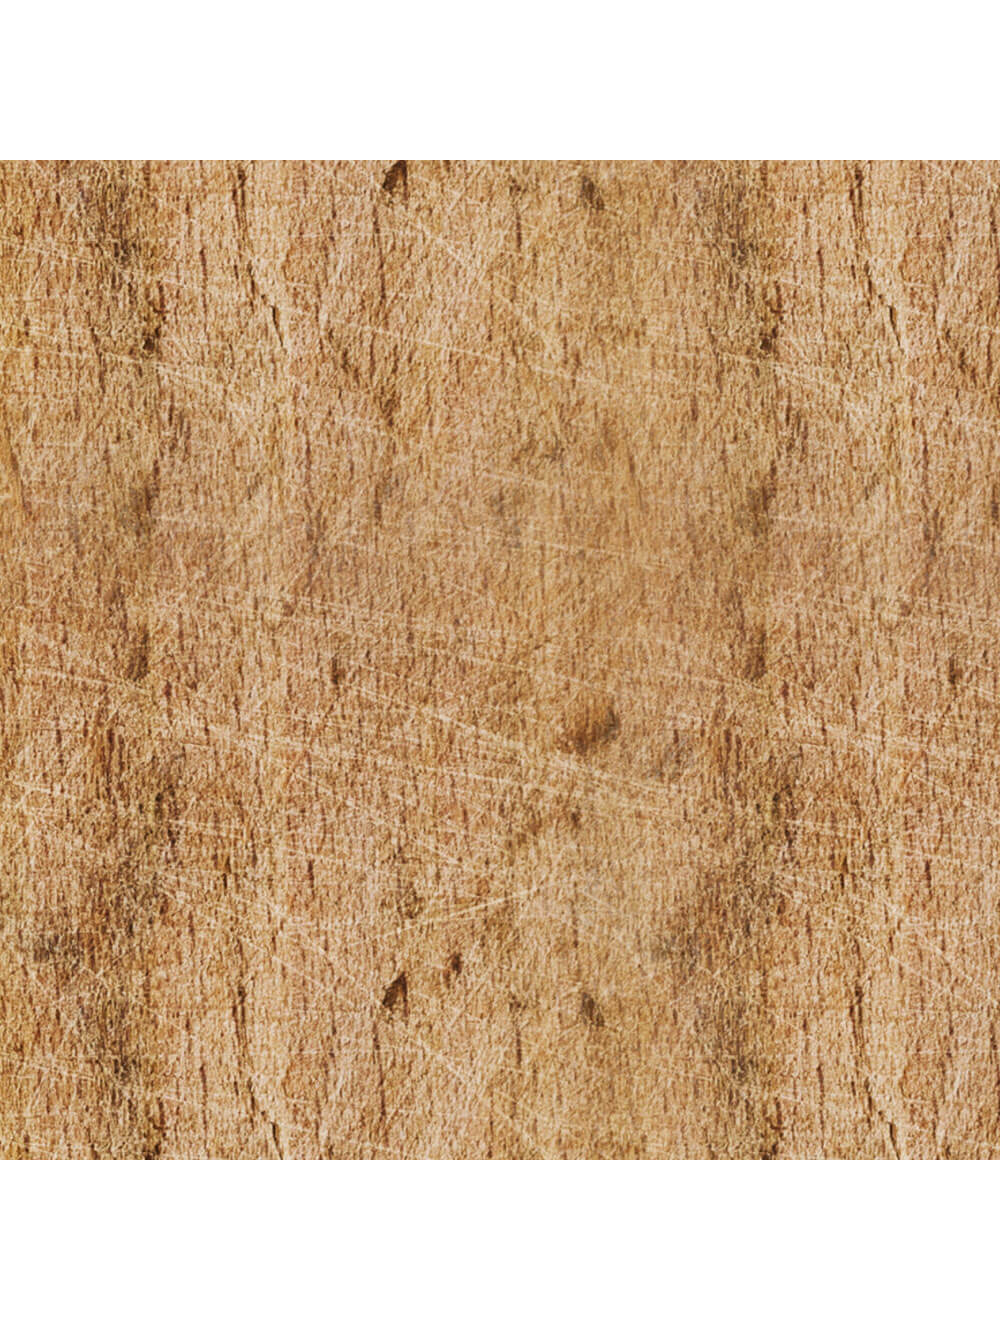 Wood Distressed Material Swatch